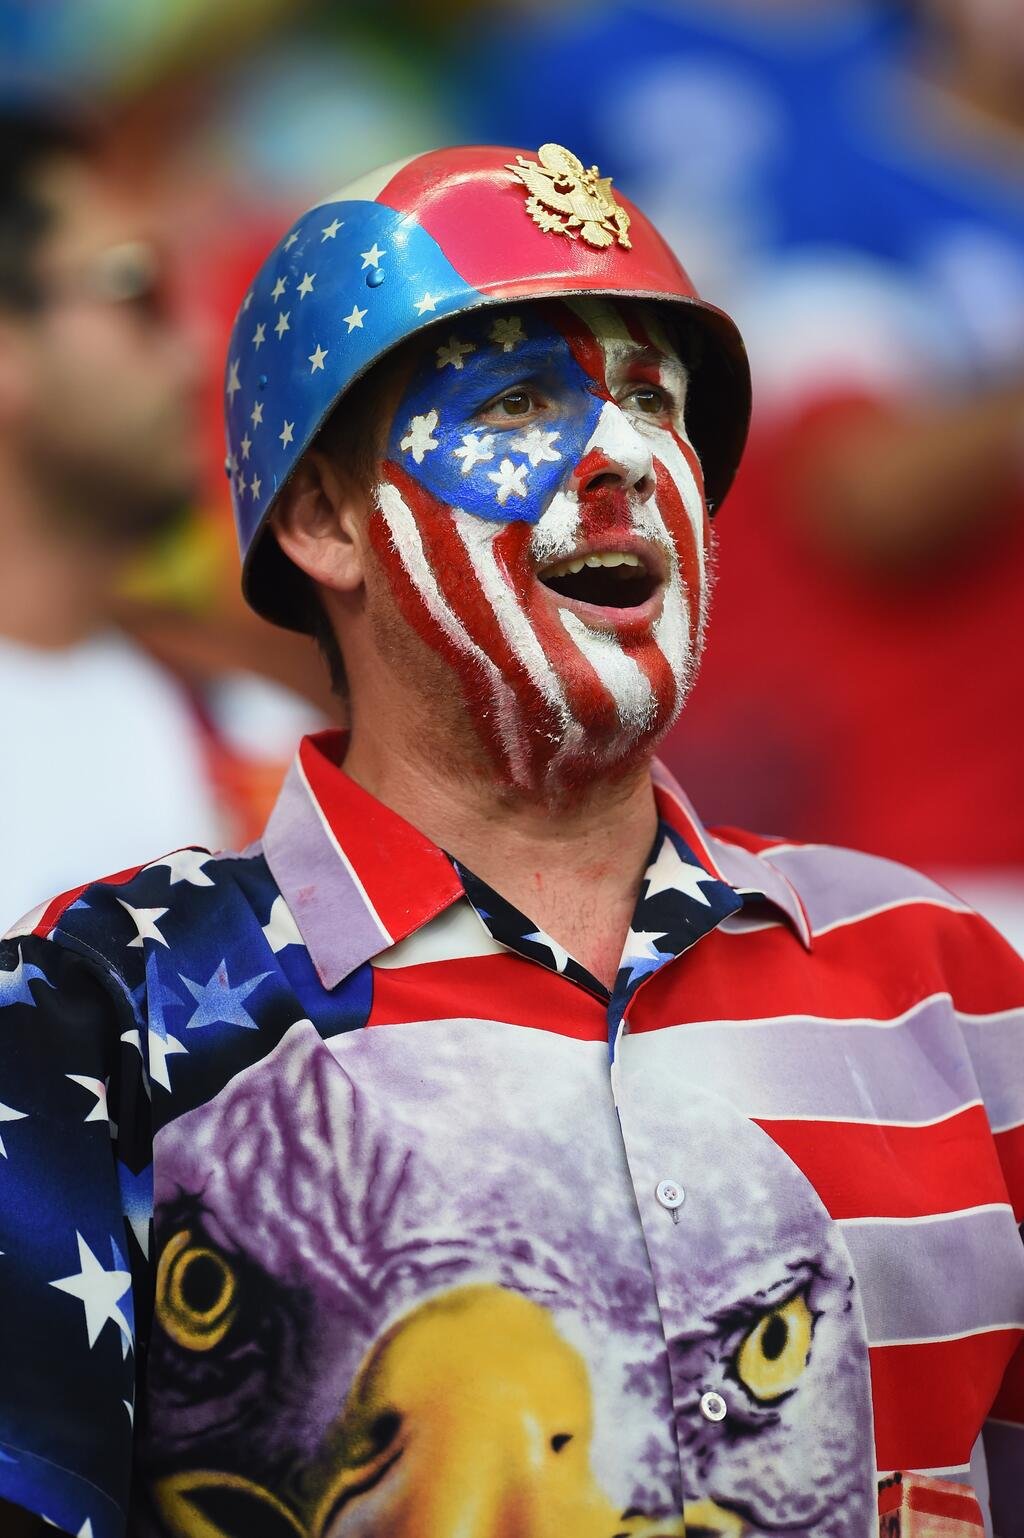 awesome-bald-eagle-usa-shirt-craziest-fans-at-2014-fifa-world-cup.jpg